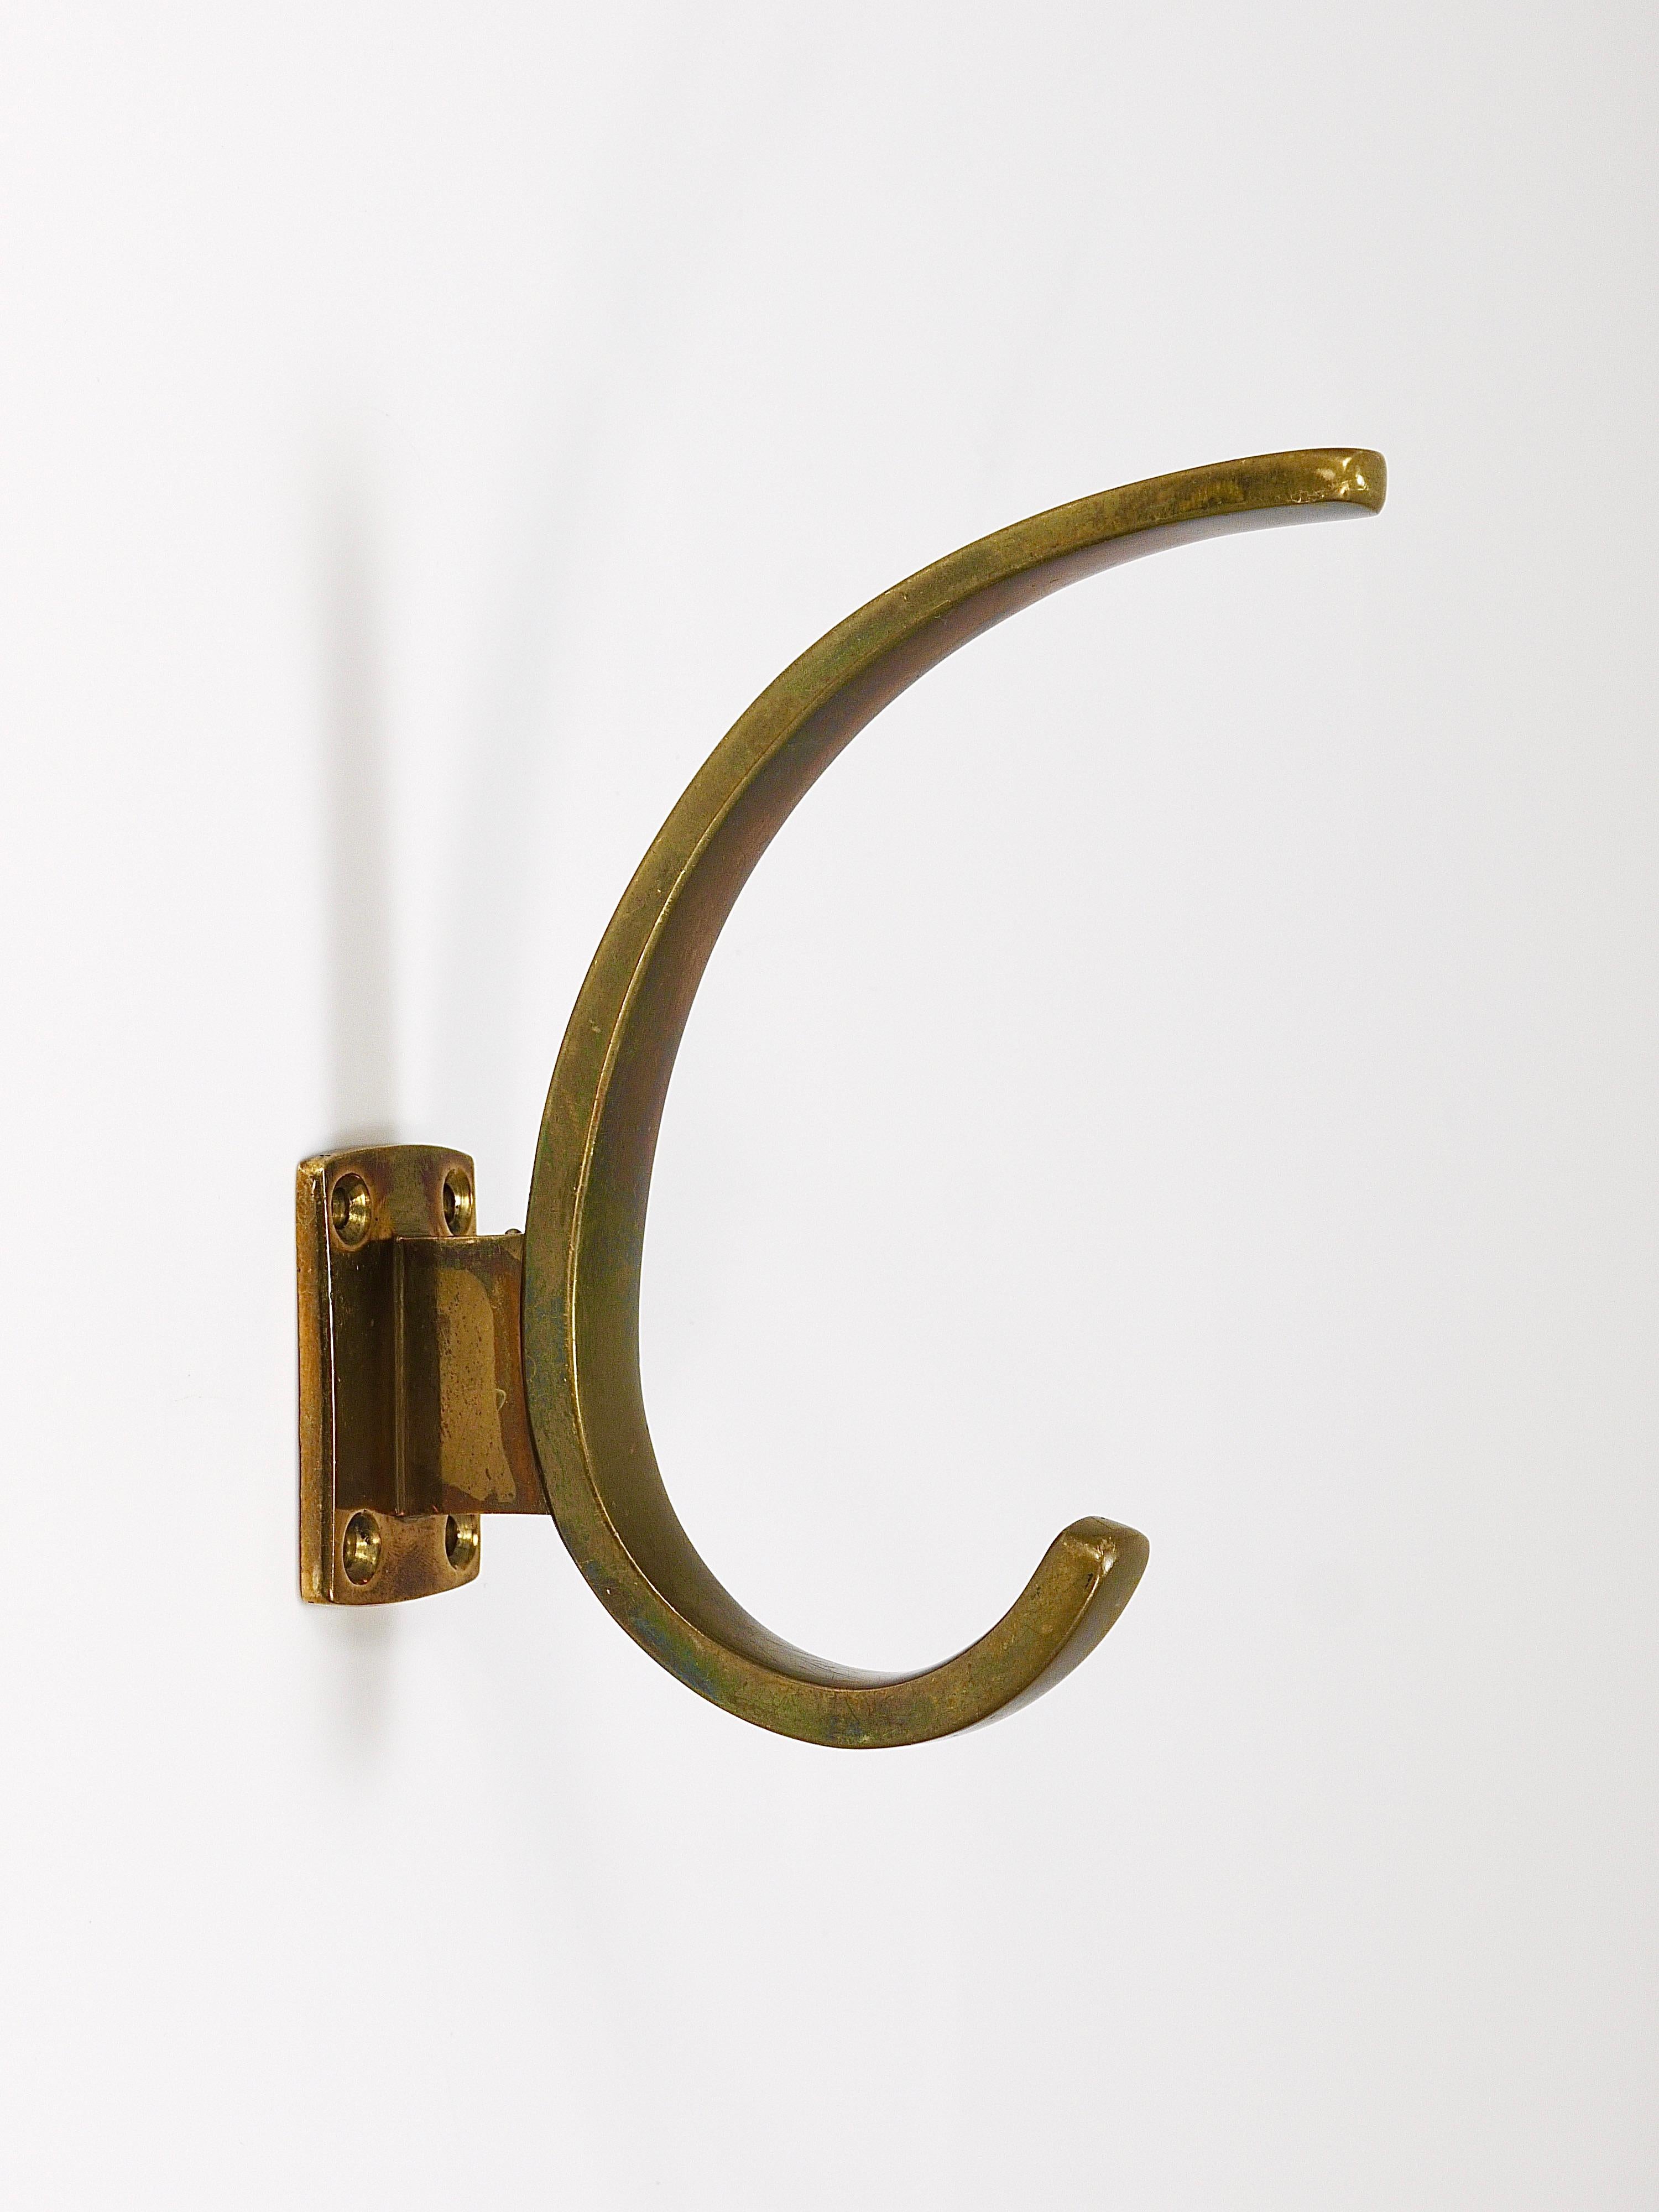 A pair of elegant and beautifully curved vintage Art Nouveau „Jugendstil“ wall coat hooks, made of solid brass, dated to the 1920s, Vienna, Austria. Solid pieces, in good condition with nice patina. Sold and priced as a pair of two. 